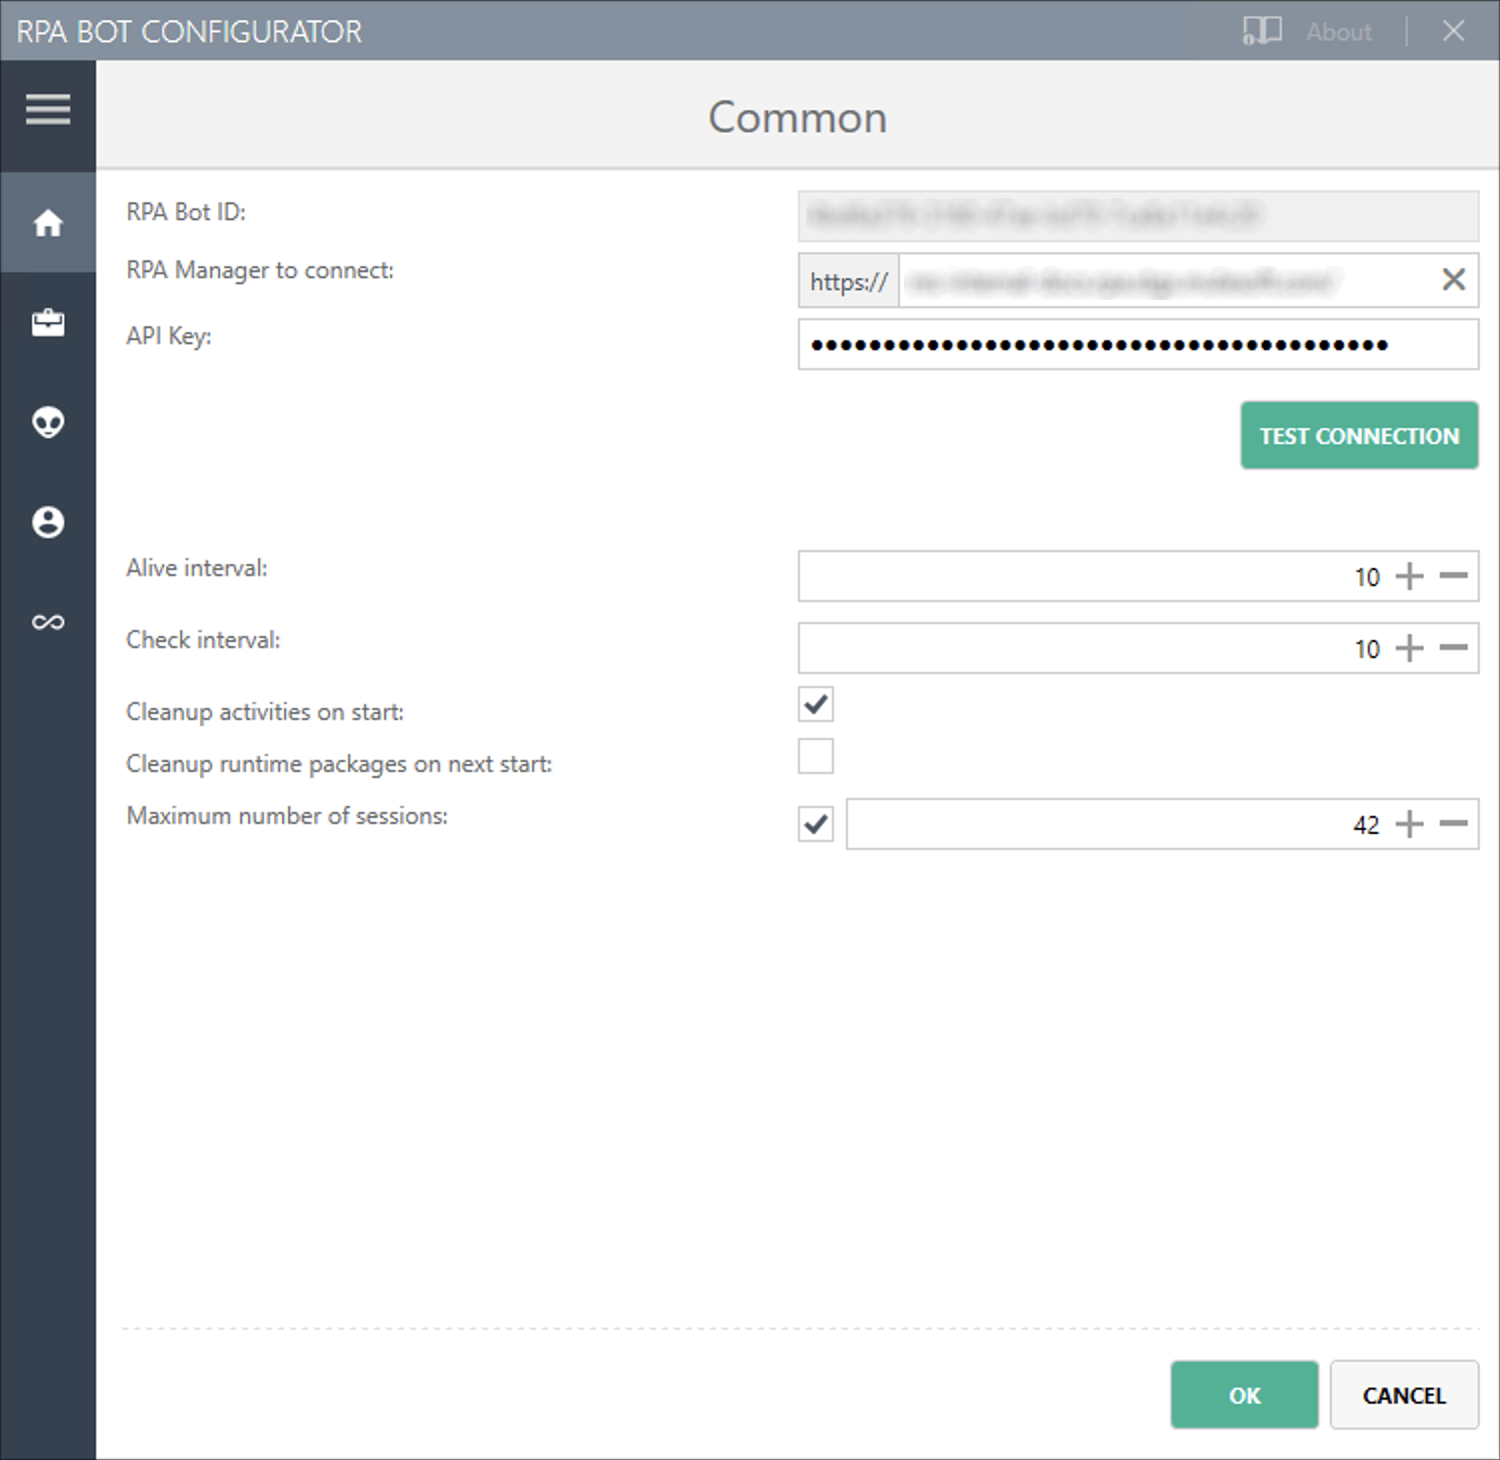 The RPA Bot Configurator application showing the Common settings panel